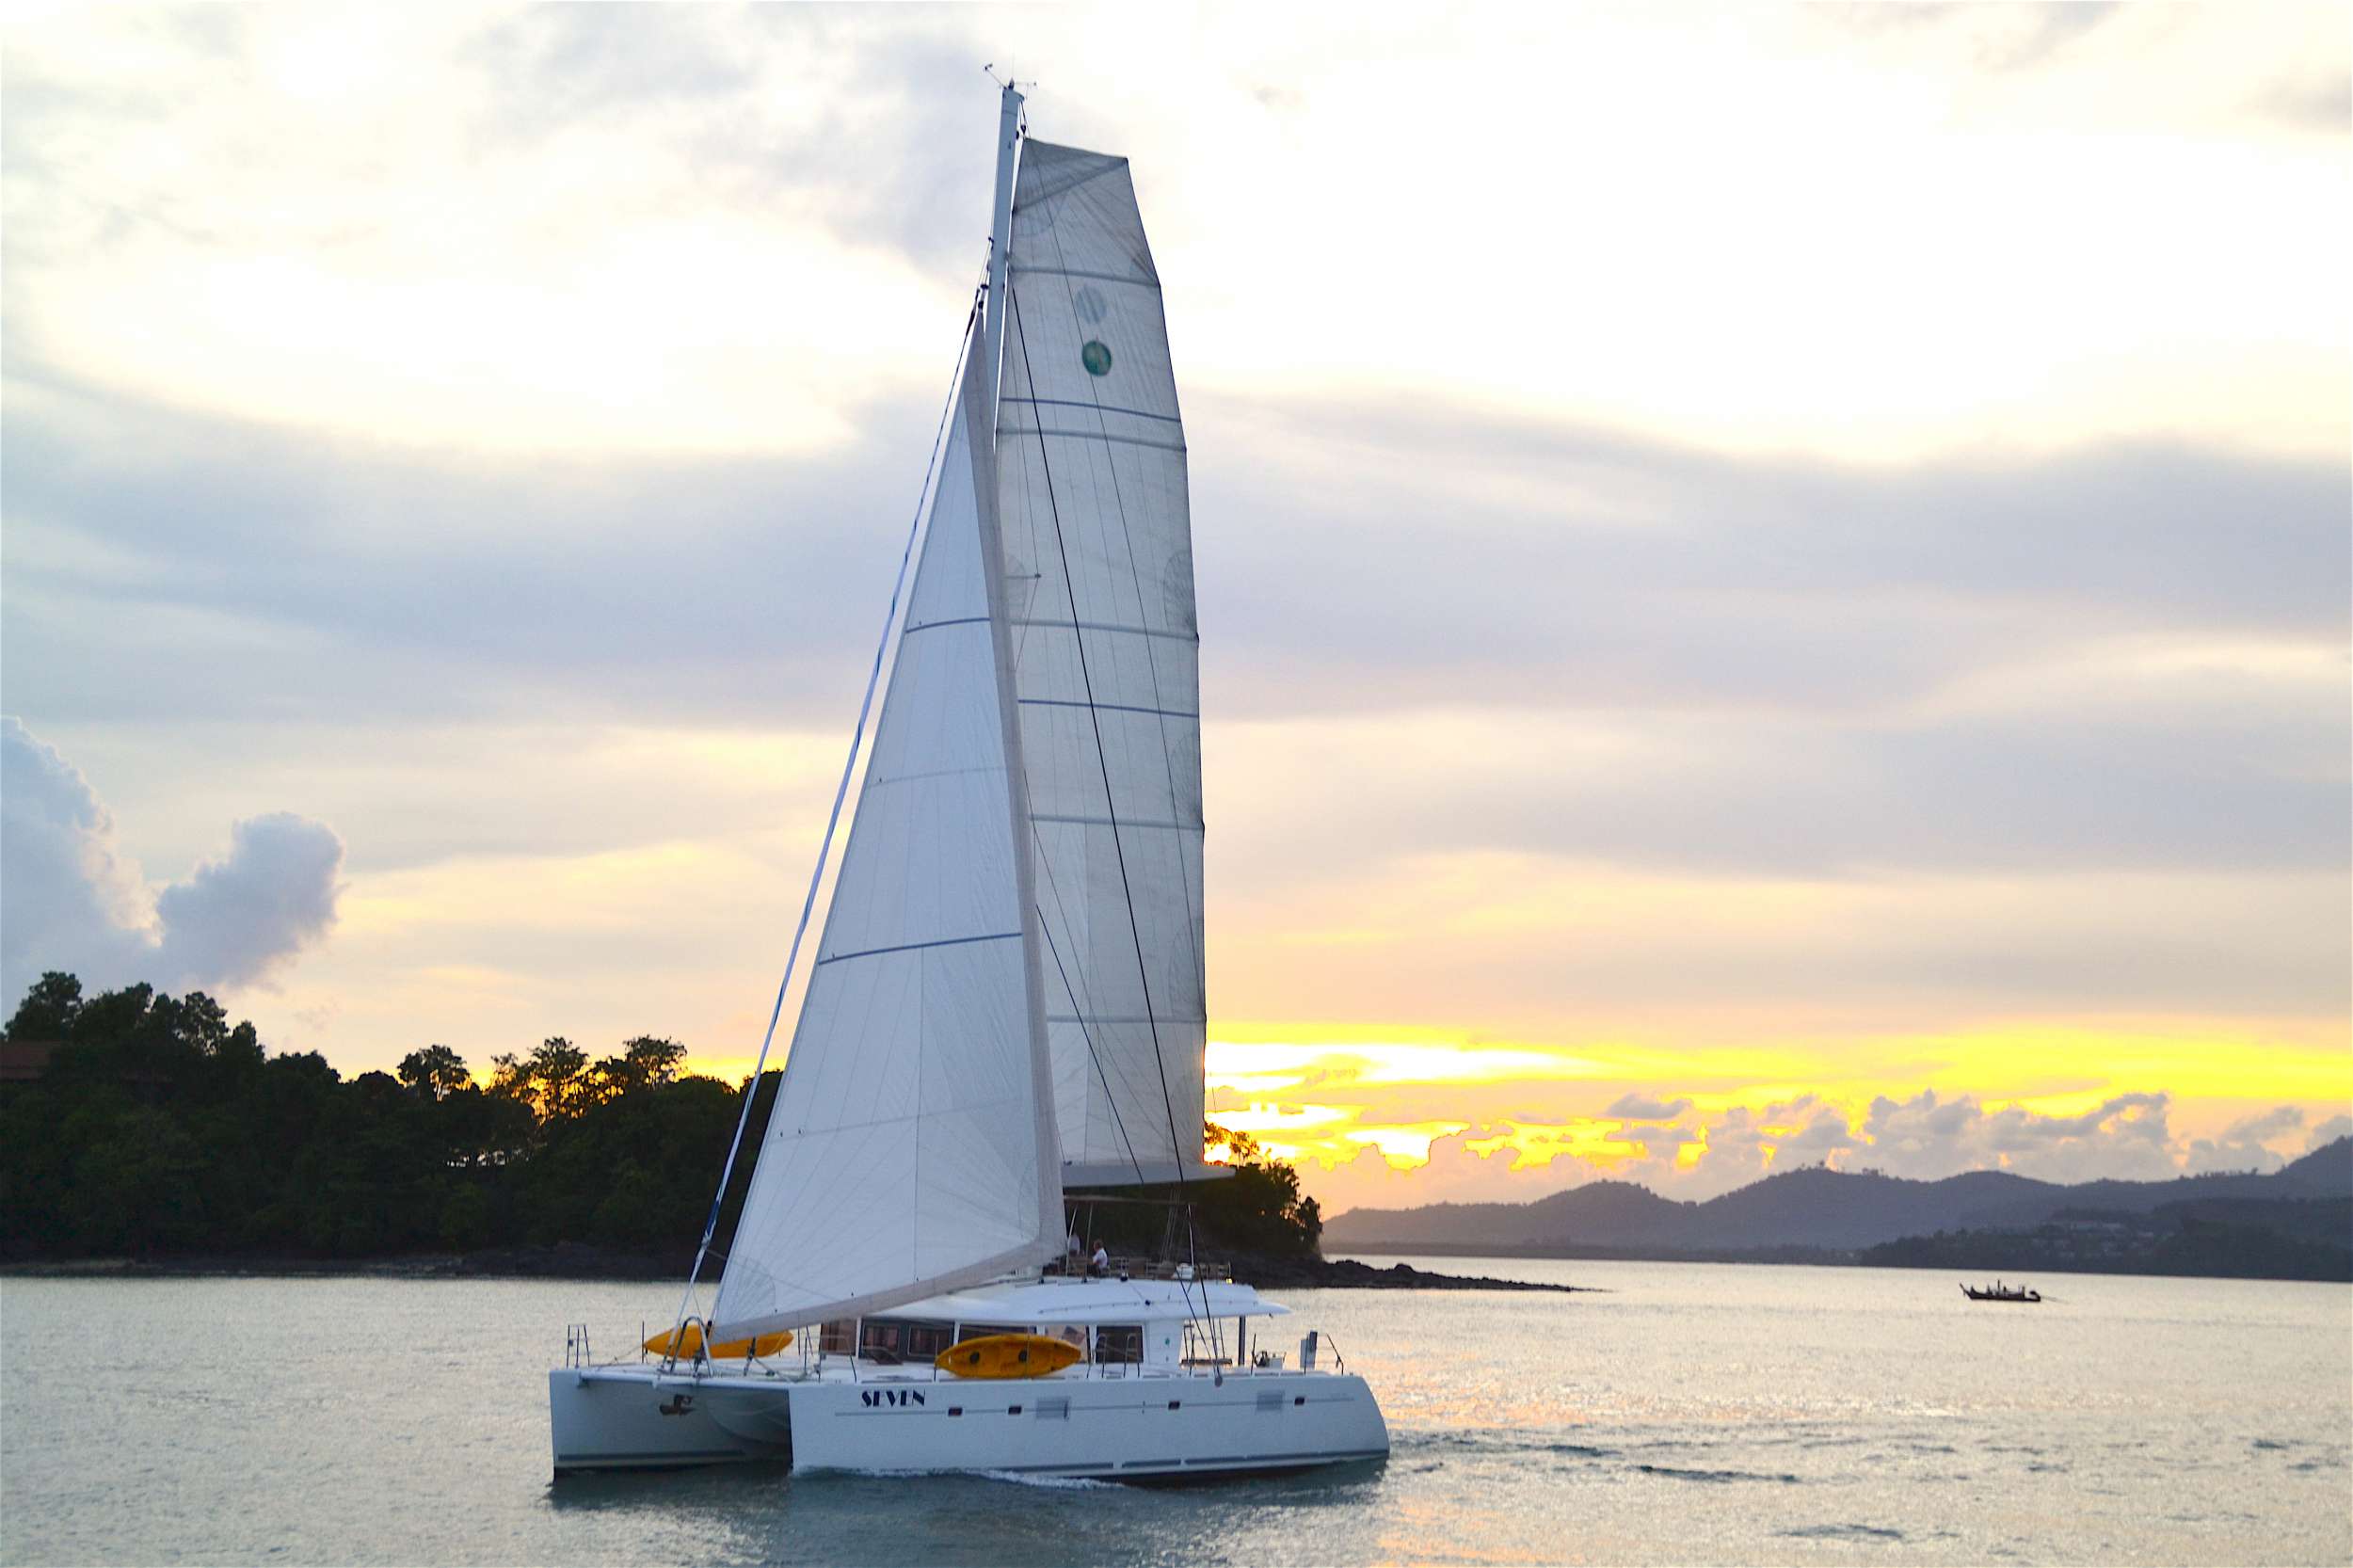 00SEVEN - Yacht Charter Philippines & Boat hire in SE Asia 2